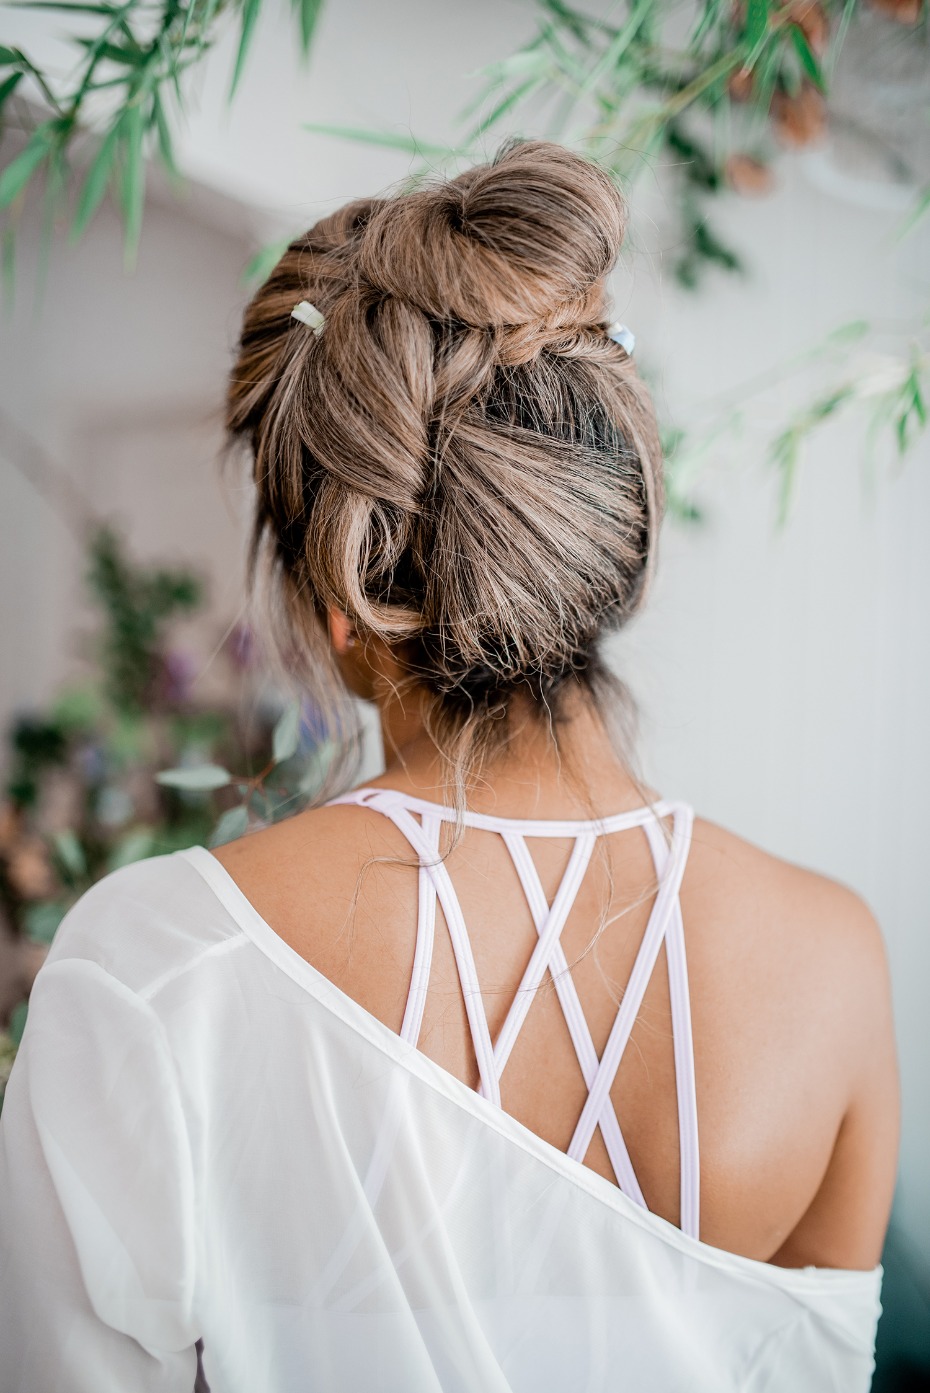 Cute hair updo for the bride